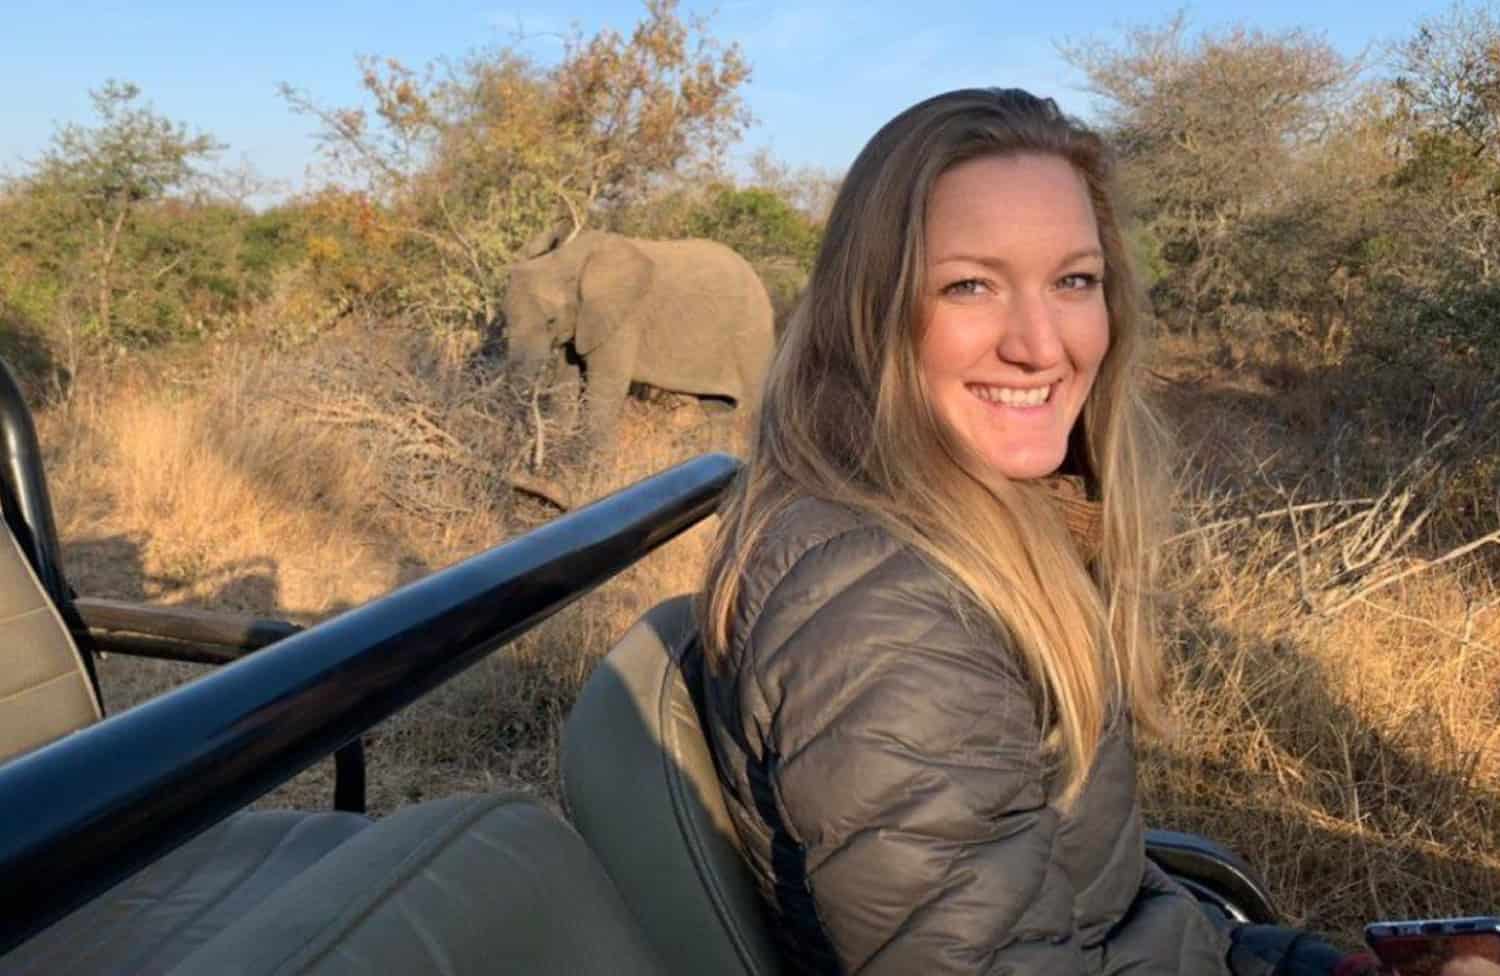 Photo of a girl in an outdoor safari with an elephant behind her